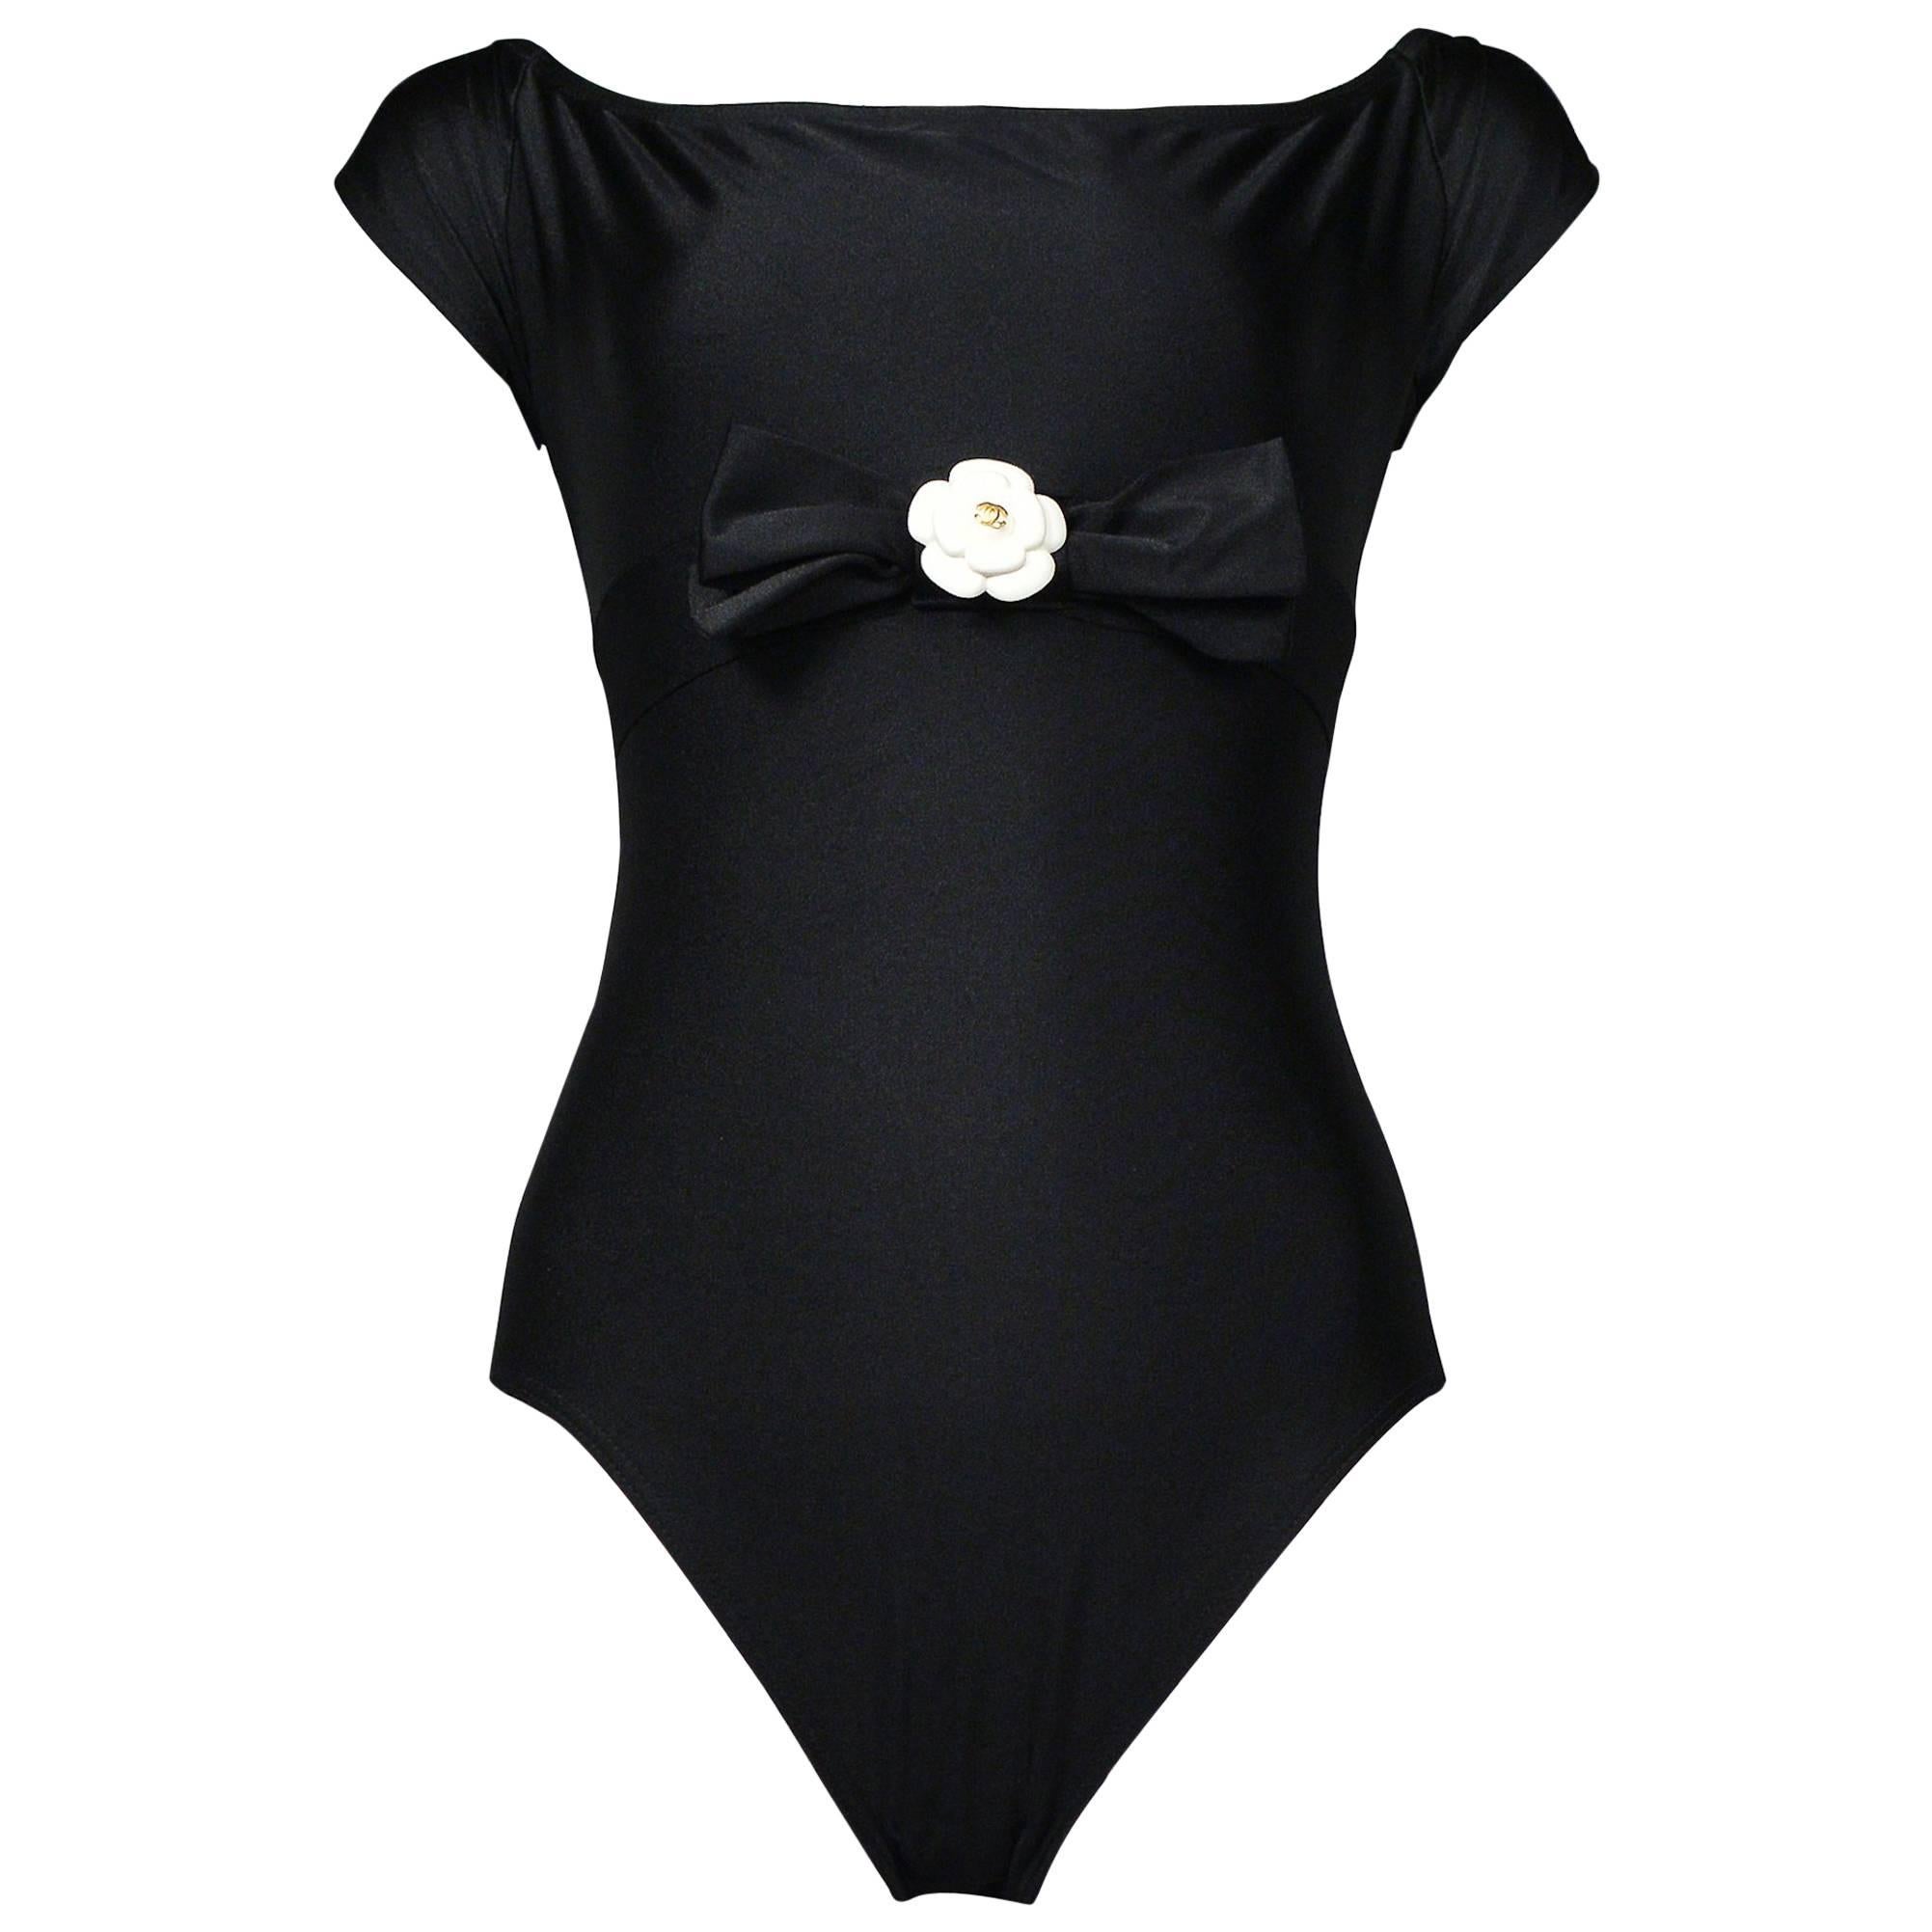 Chanel Camellia Charm & Bow Swim or Body Suit - New Vintage. Never Worn. 